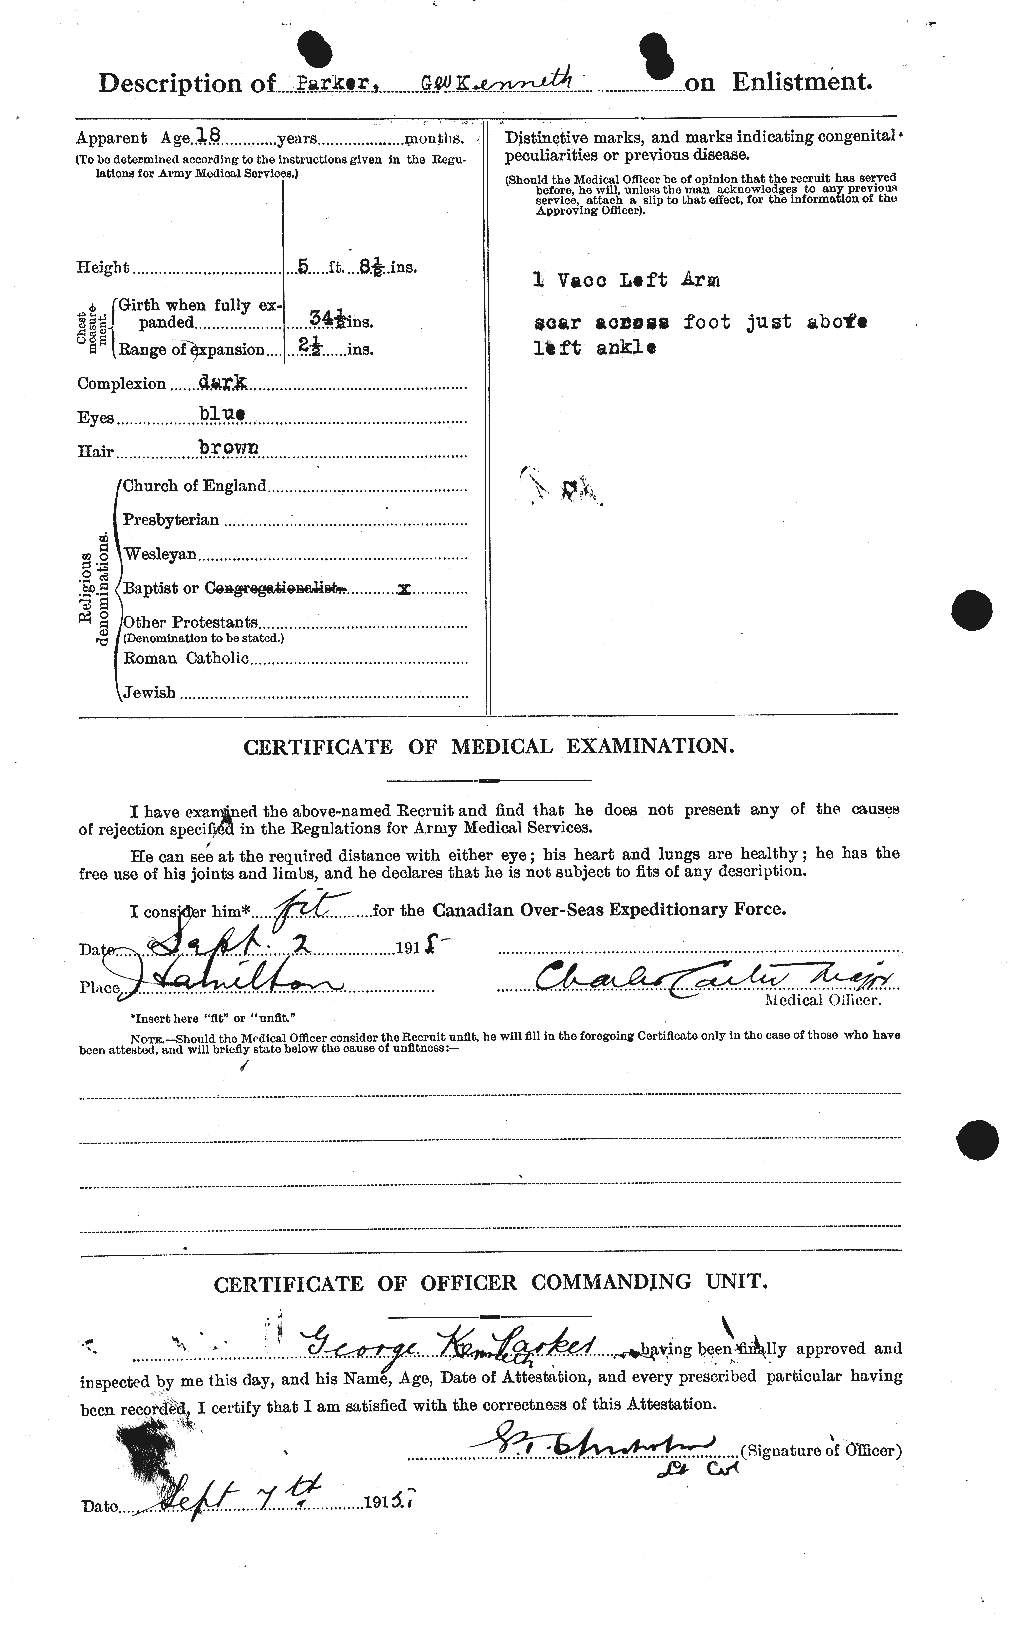 Personnel Records of the First World War - CEF 565274b